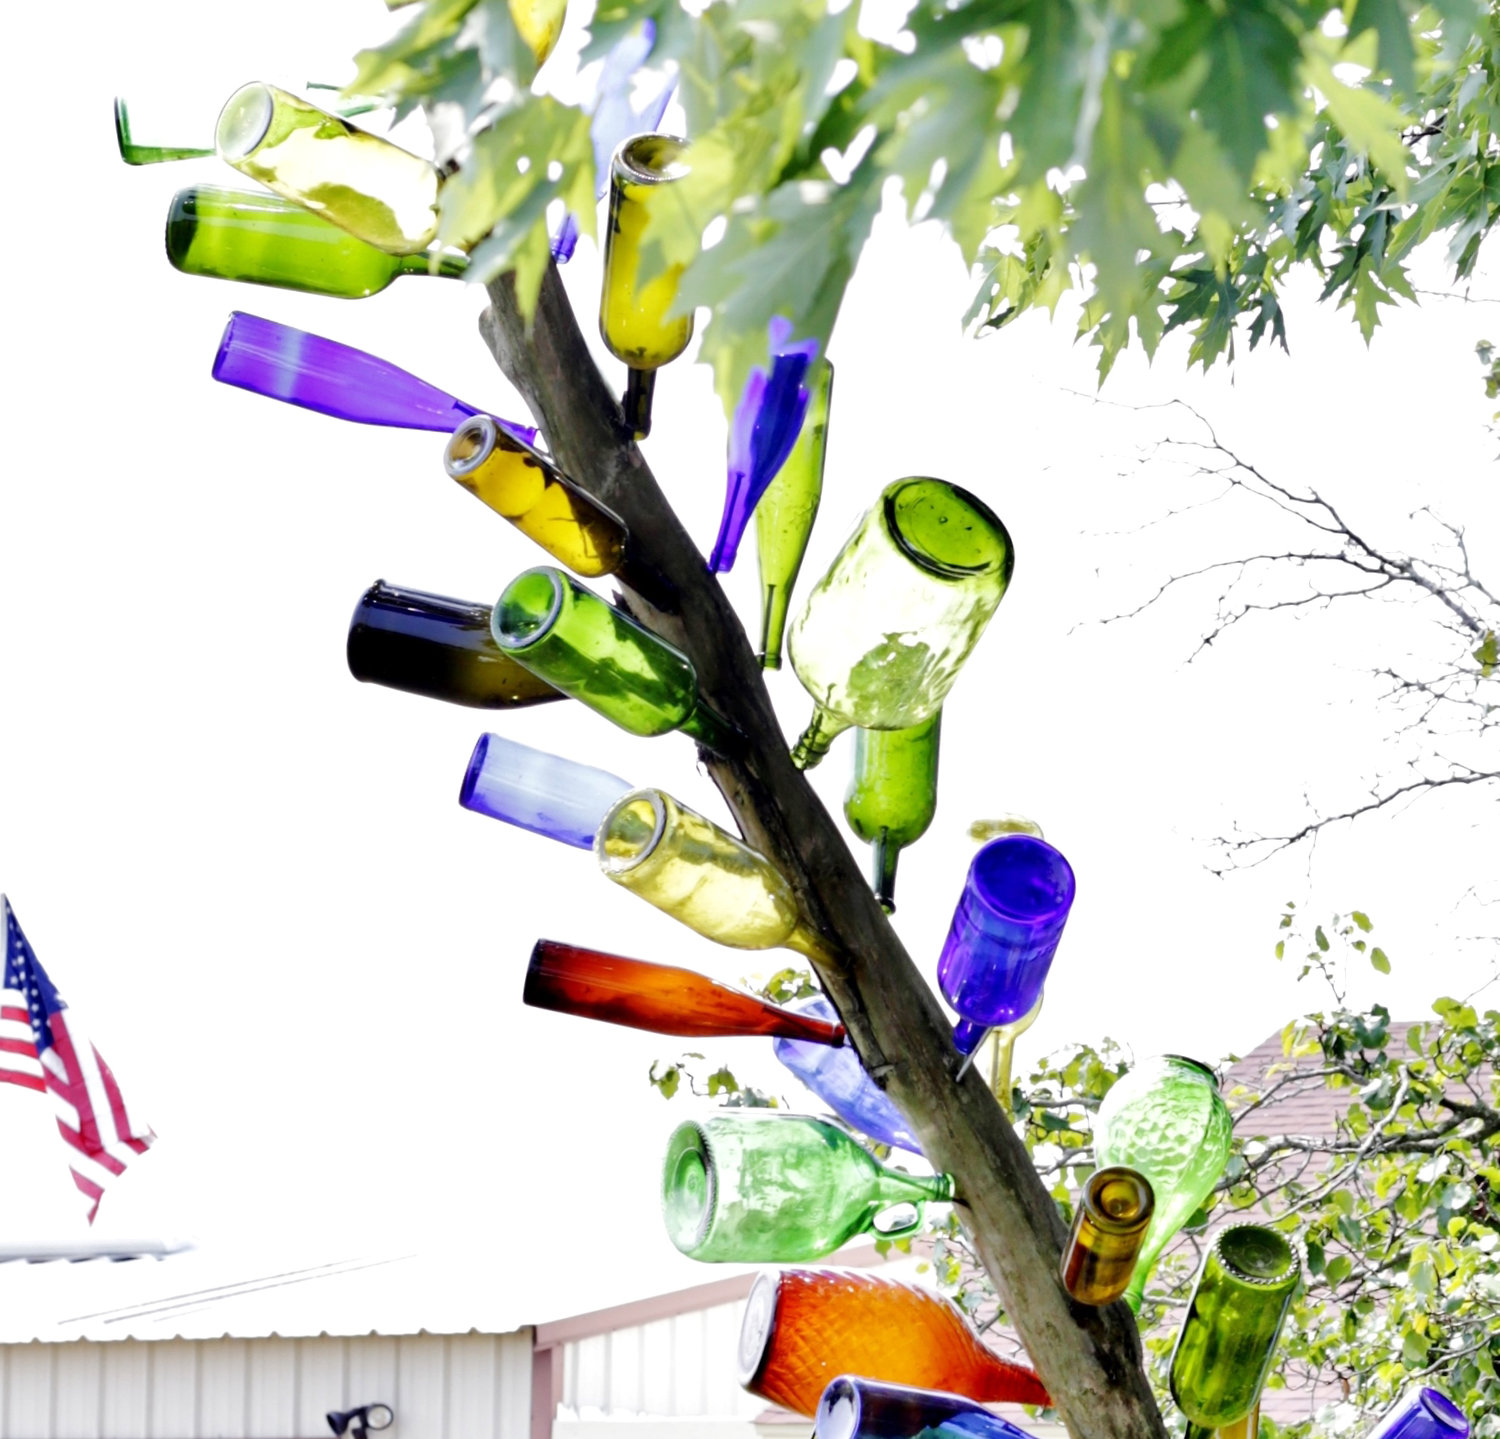 The colorful bottle tree just west of Yantis.